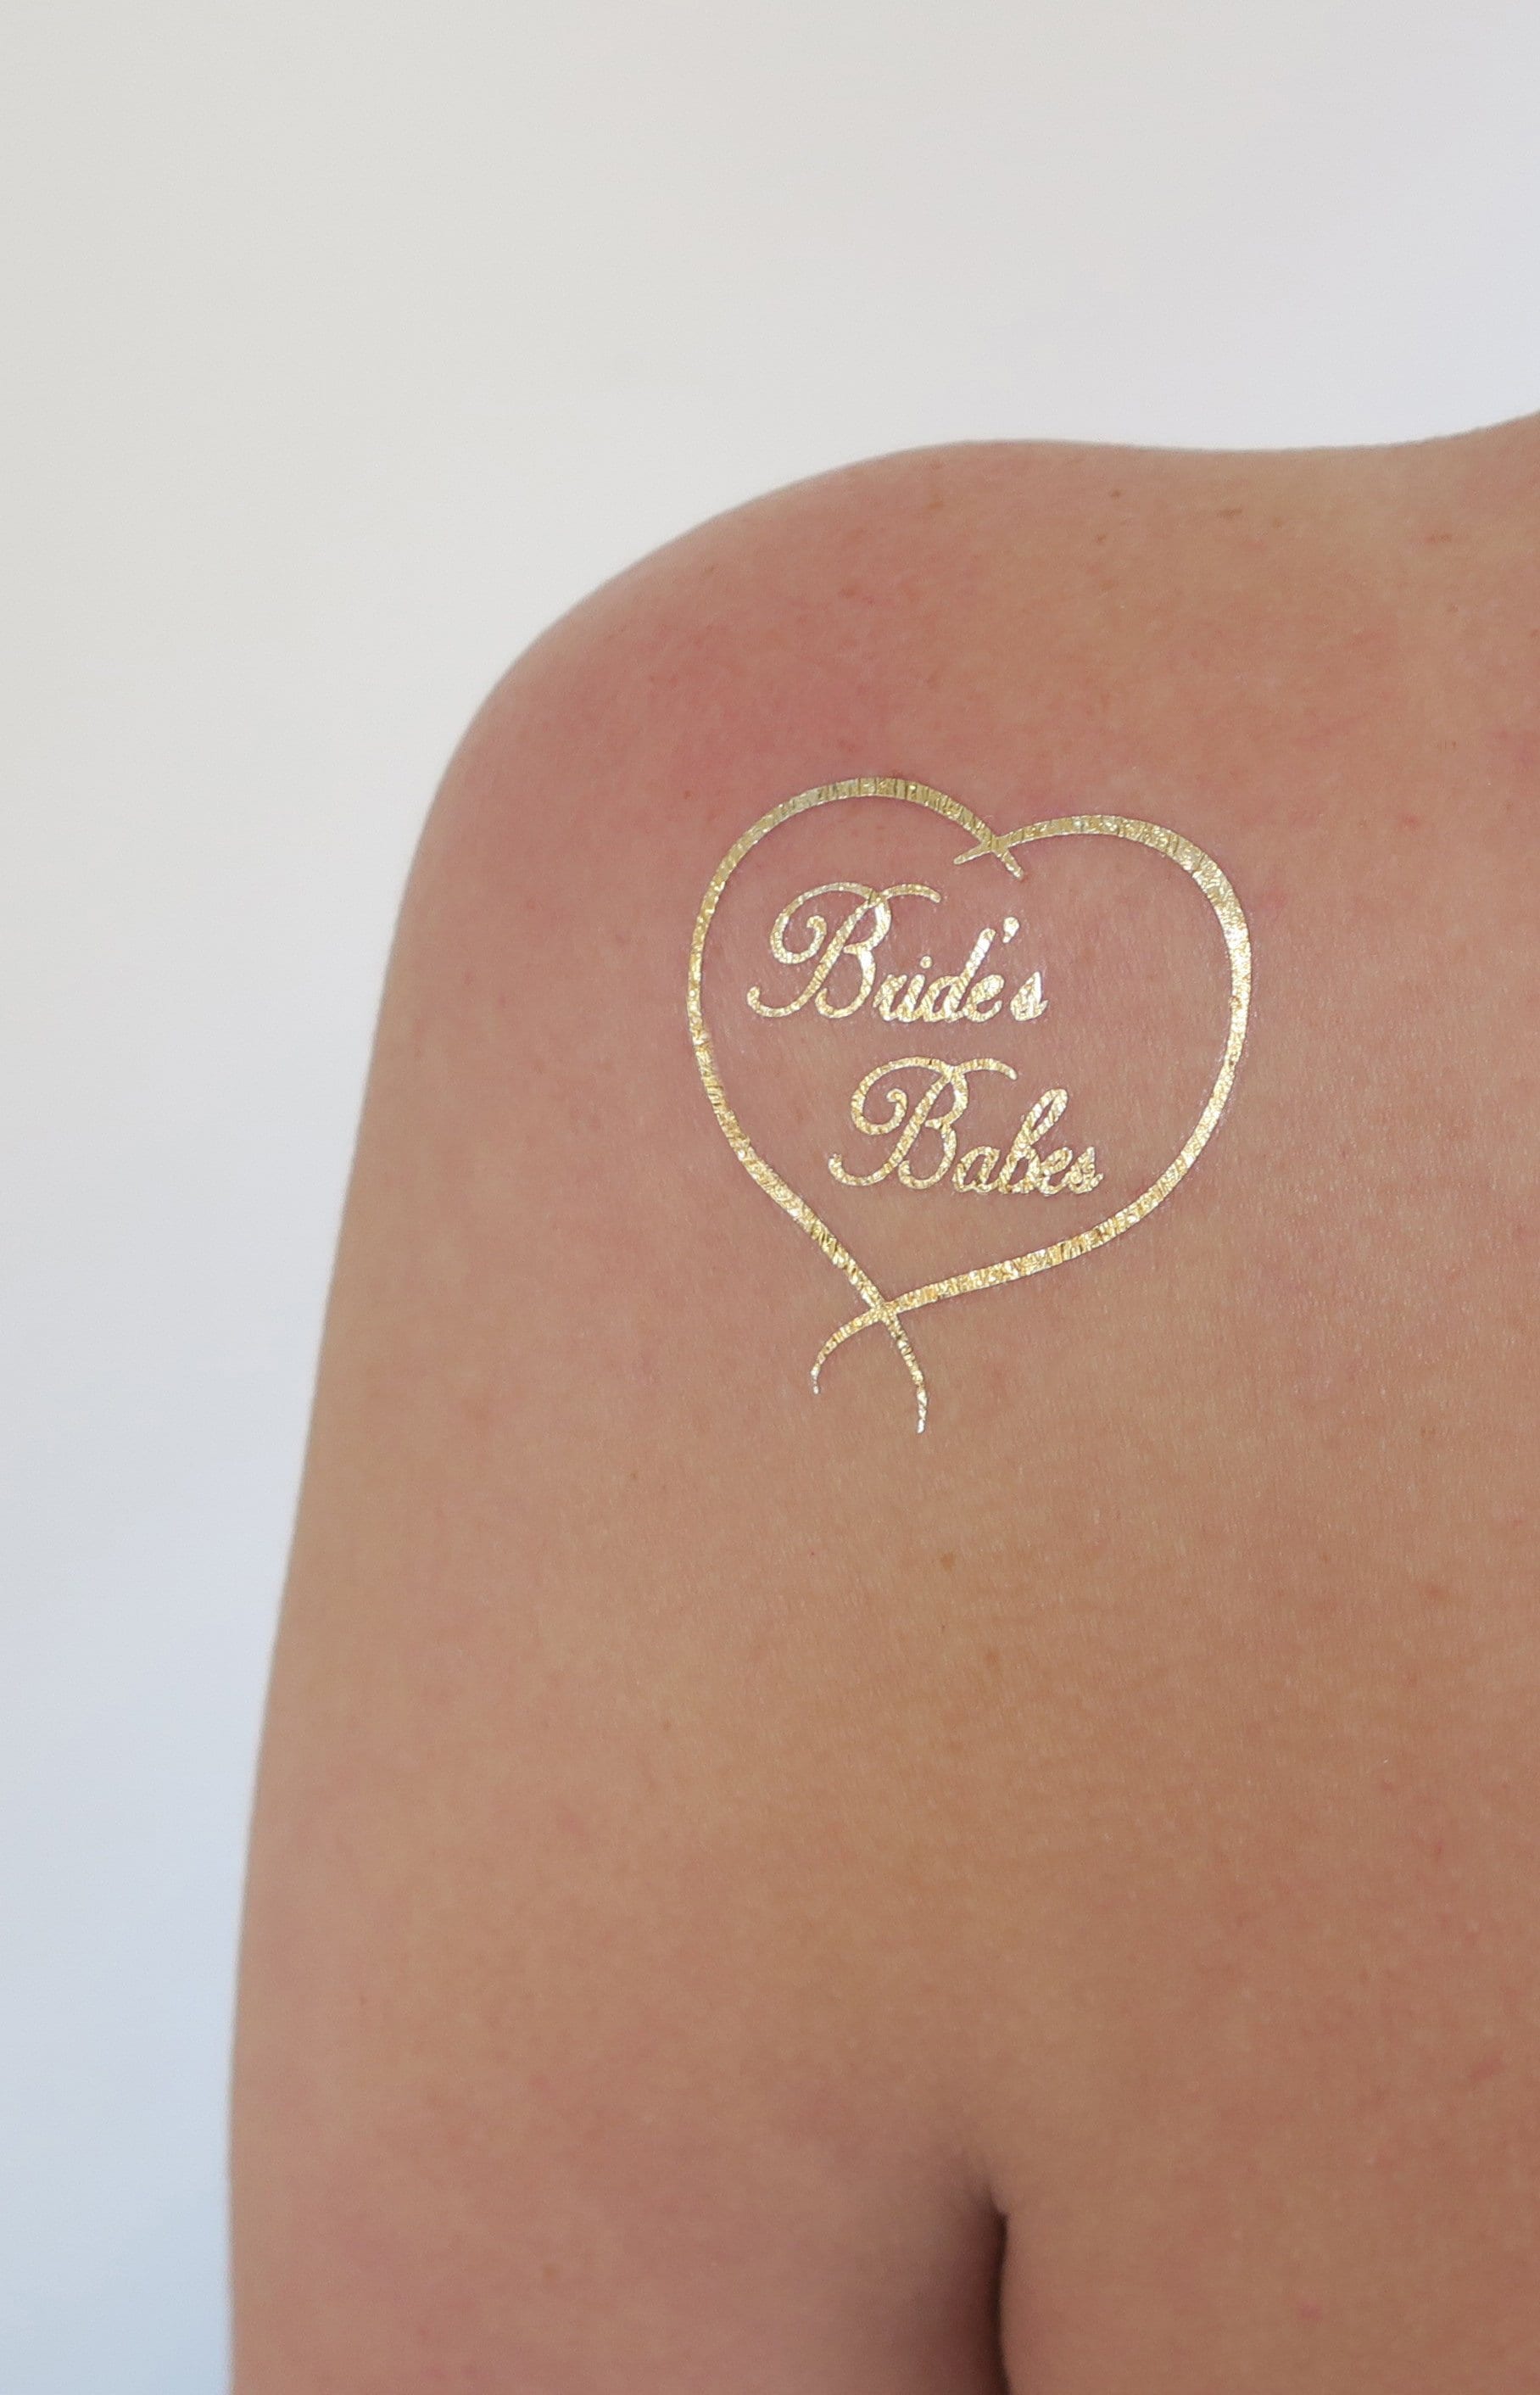 Fancy Dress 8 Gold Hen Night Party Tattoos,1 x Bride to Be 7 x Bride Babes 